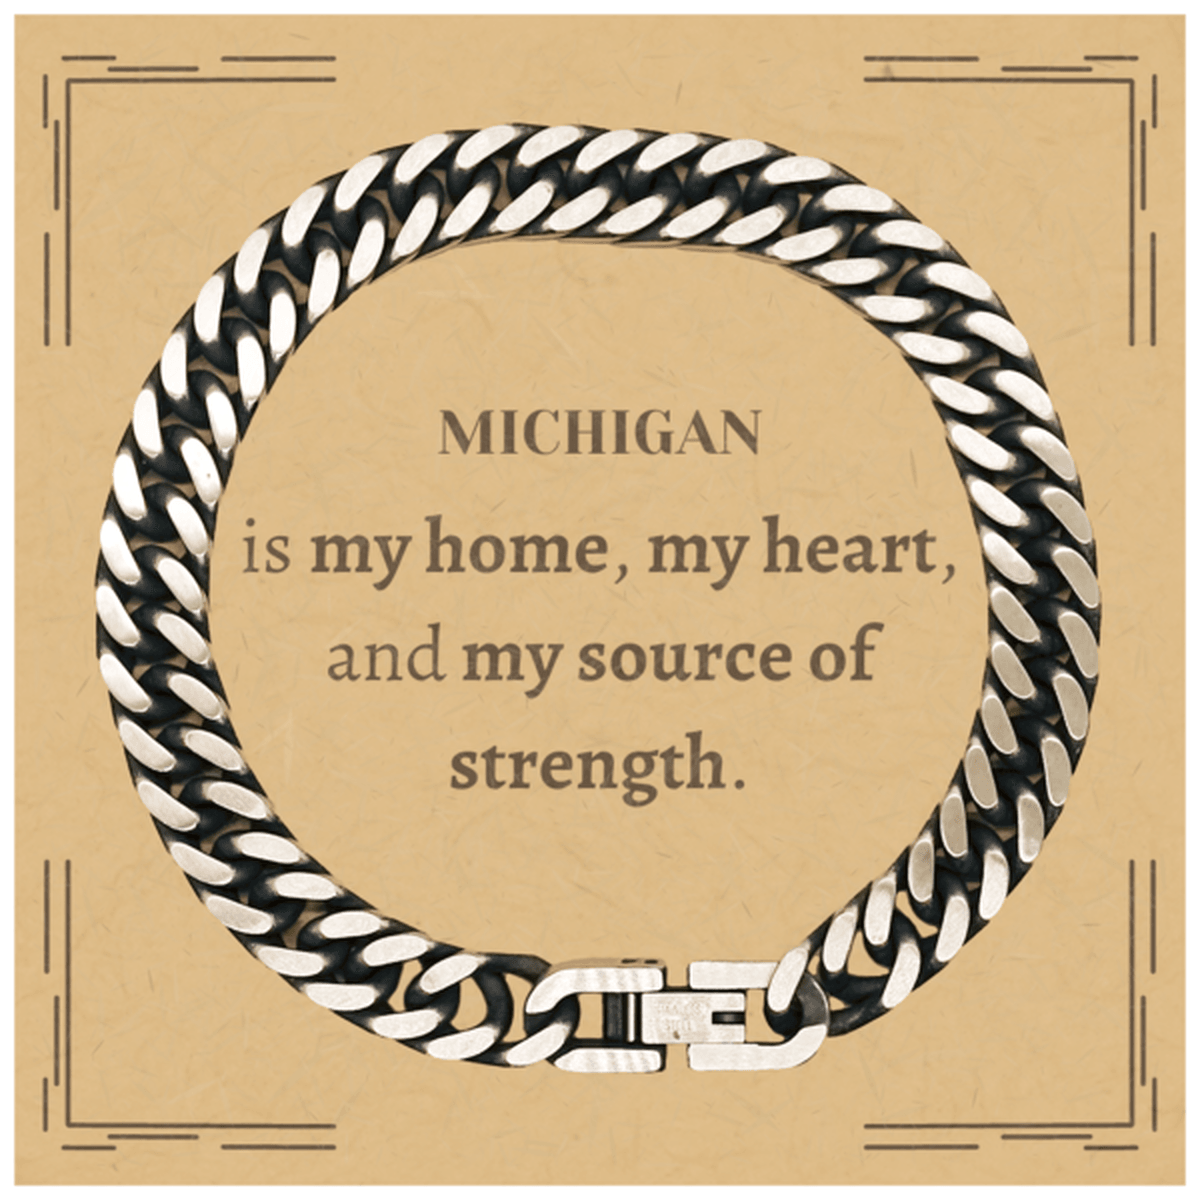 Michigan is my home Gifts, Lovely Michigan Birthday Christmas Cuban Link Chain Bracelet For People from Michigan, Men, Women, Friends - Mallard Moon Gift Shop